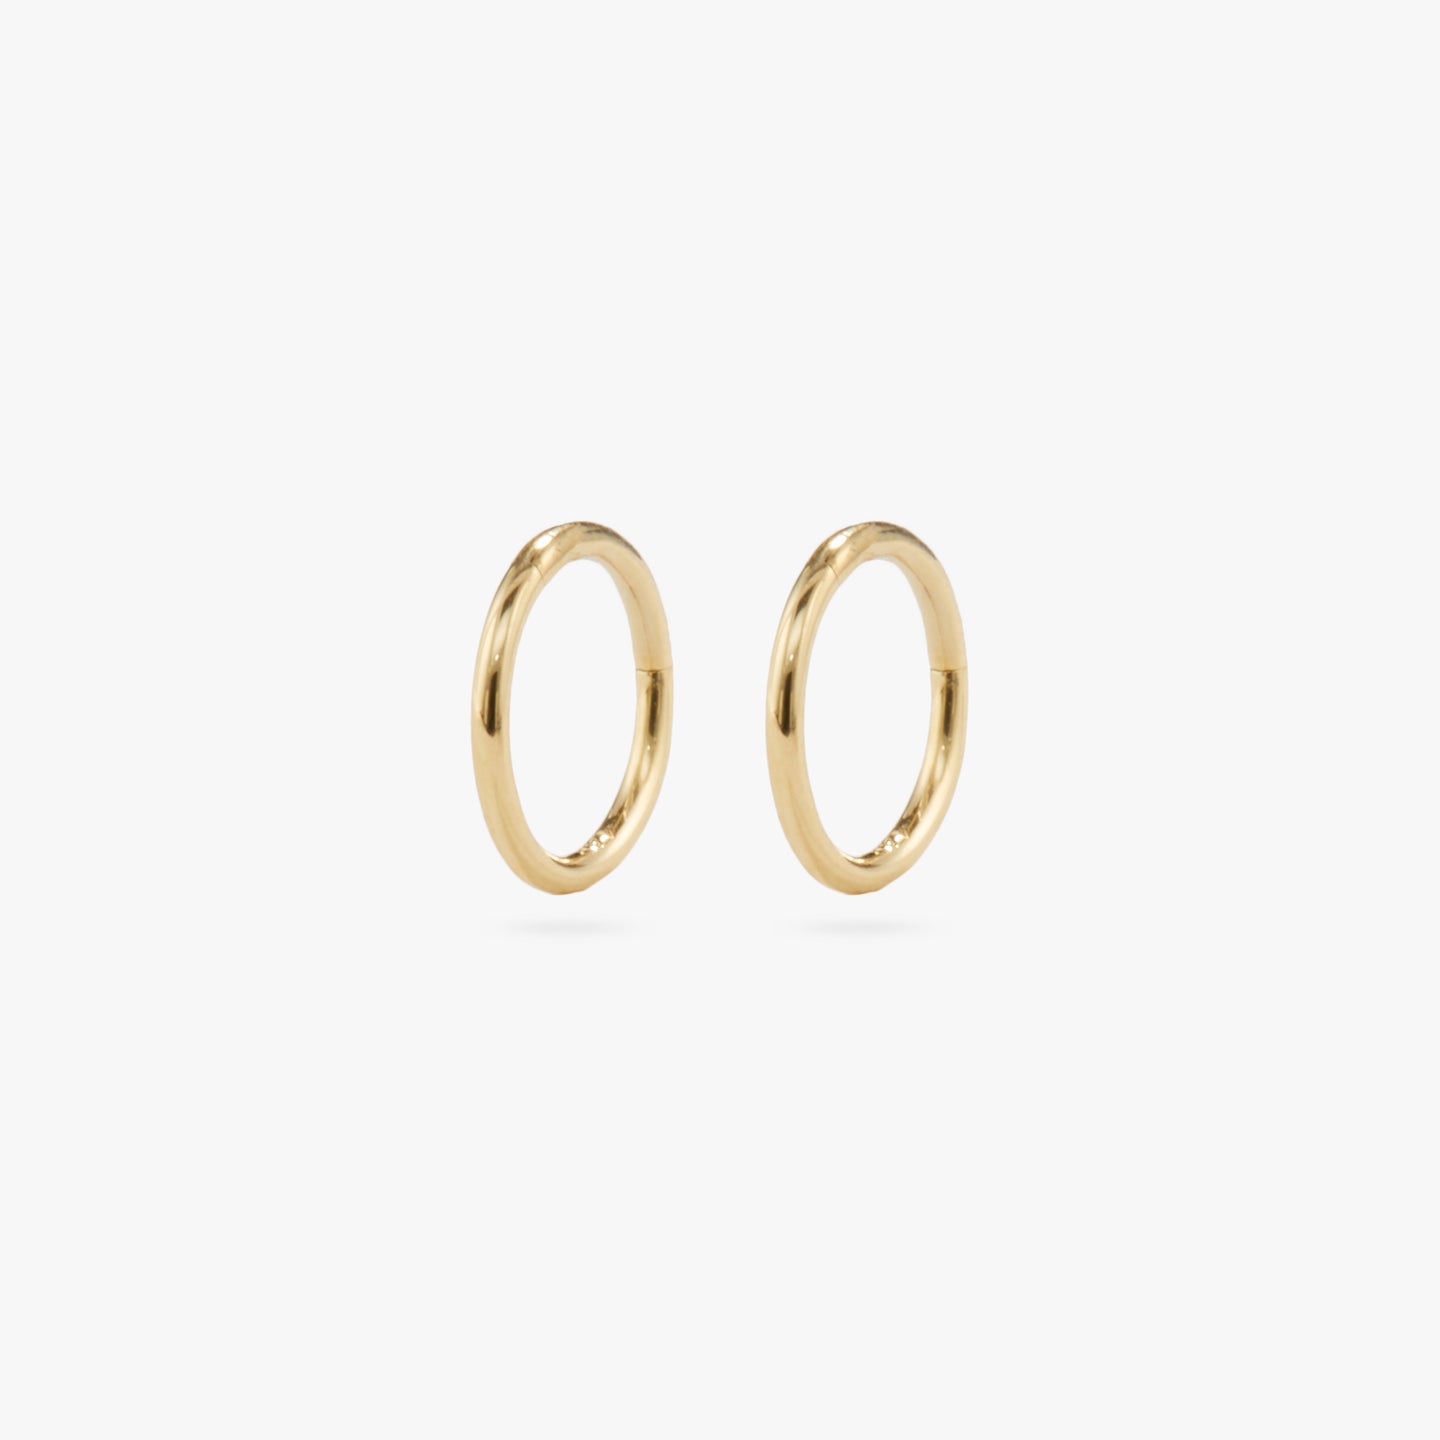 This is a gold clicker earring [pair] color:null|gold